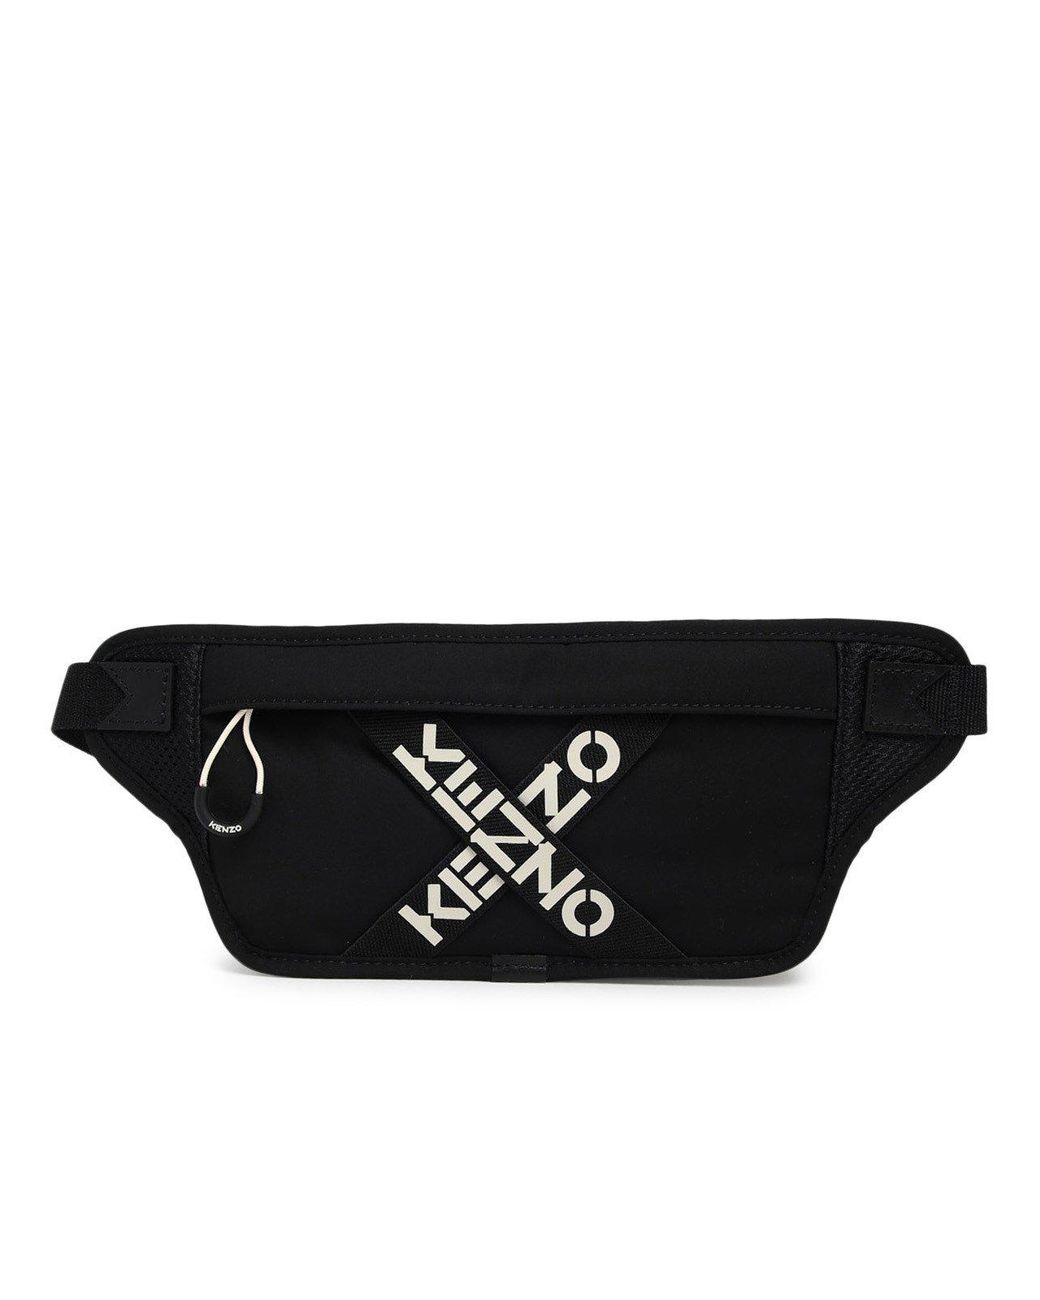 KENZO Synthetic Black Fanny Pack for Men - Lyst